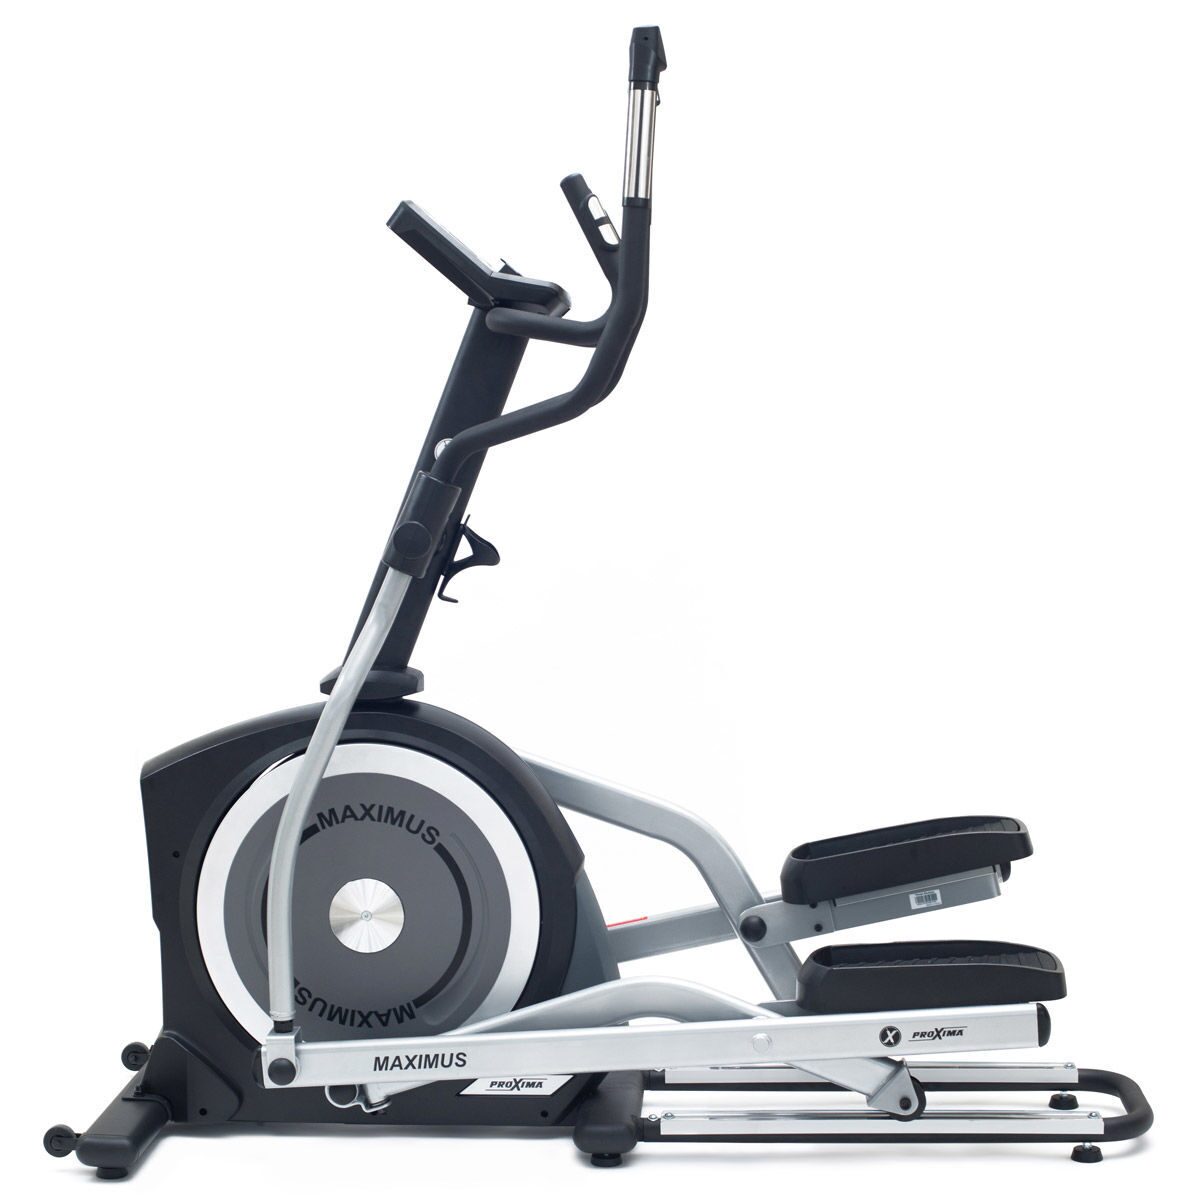 Степпер Cardio Climber Sole Fitness SC200 CC81 2019 preview 4